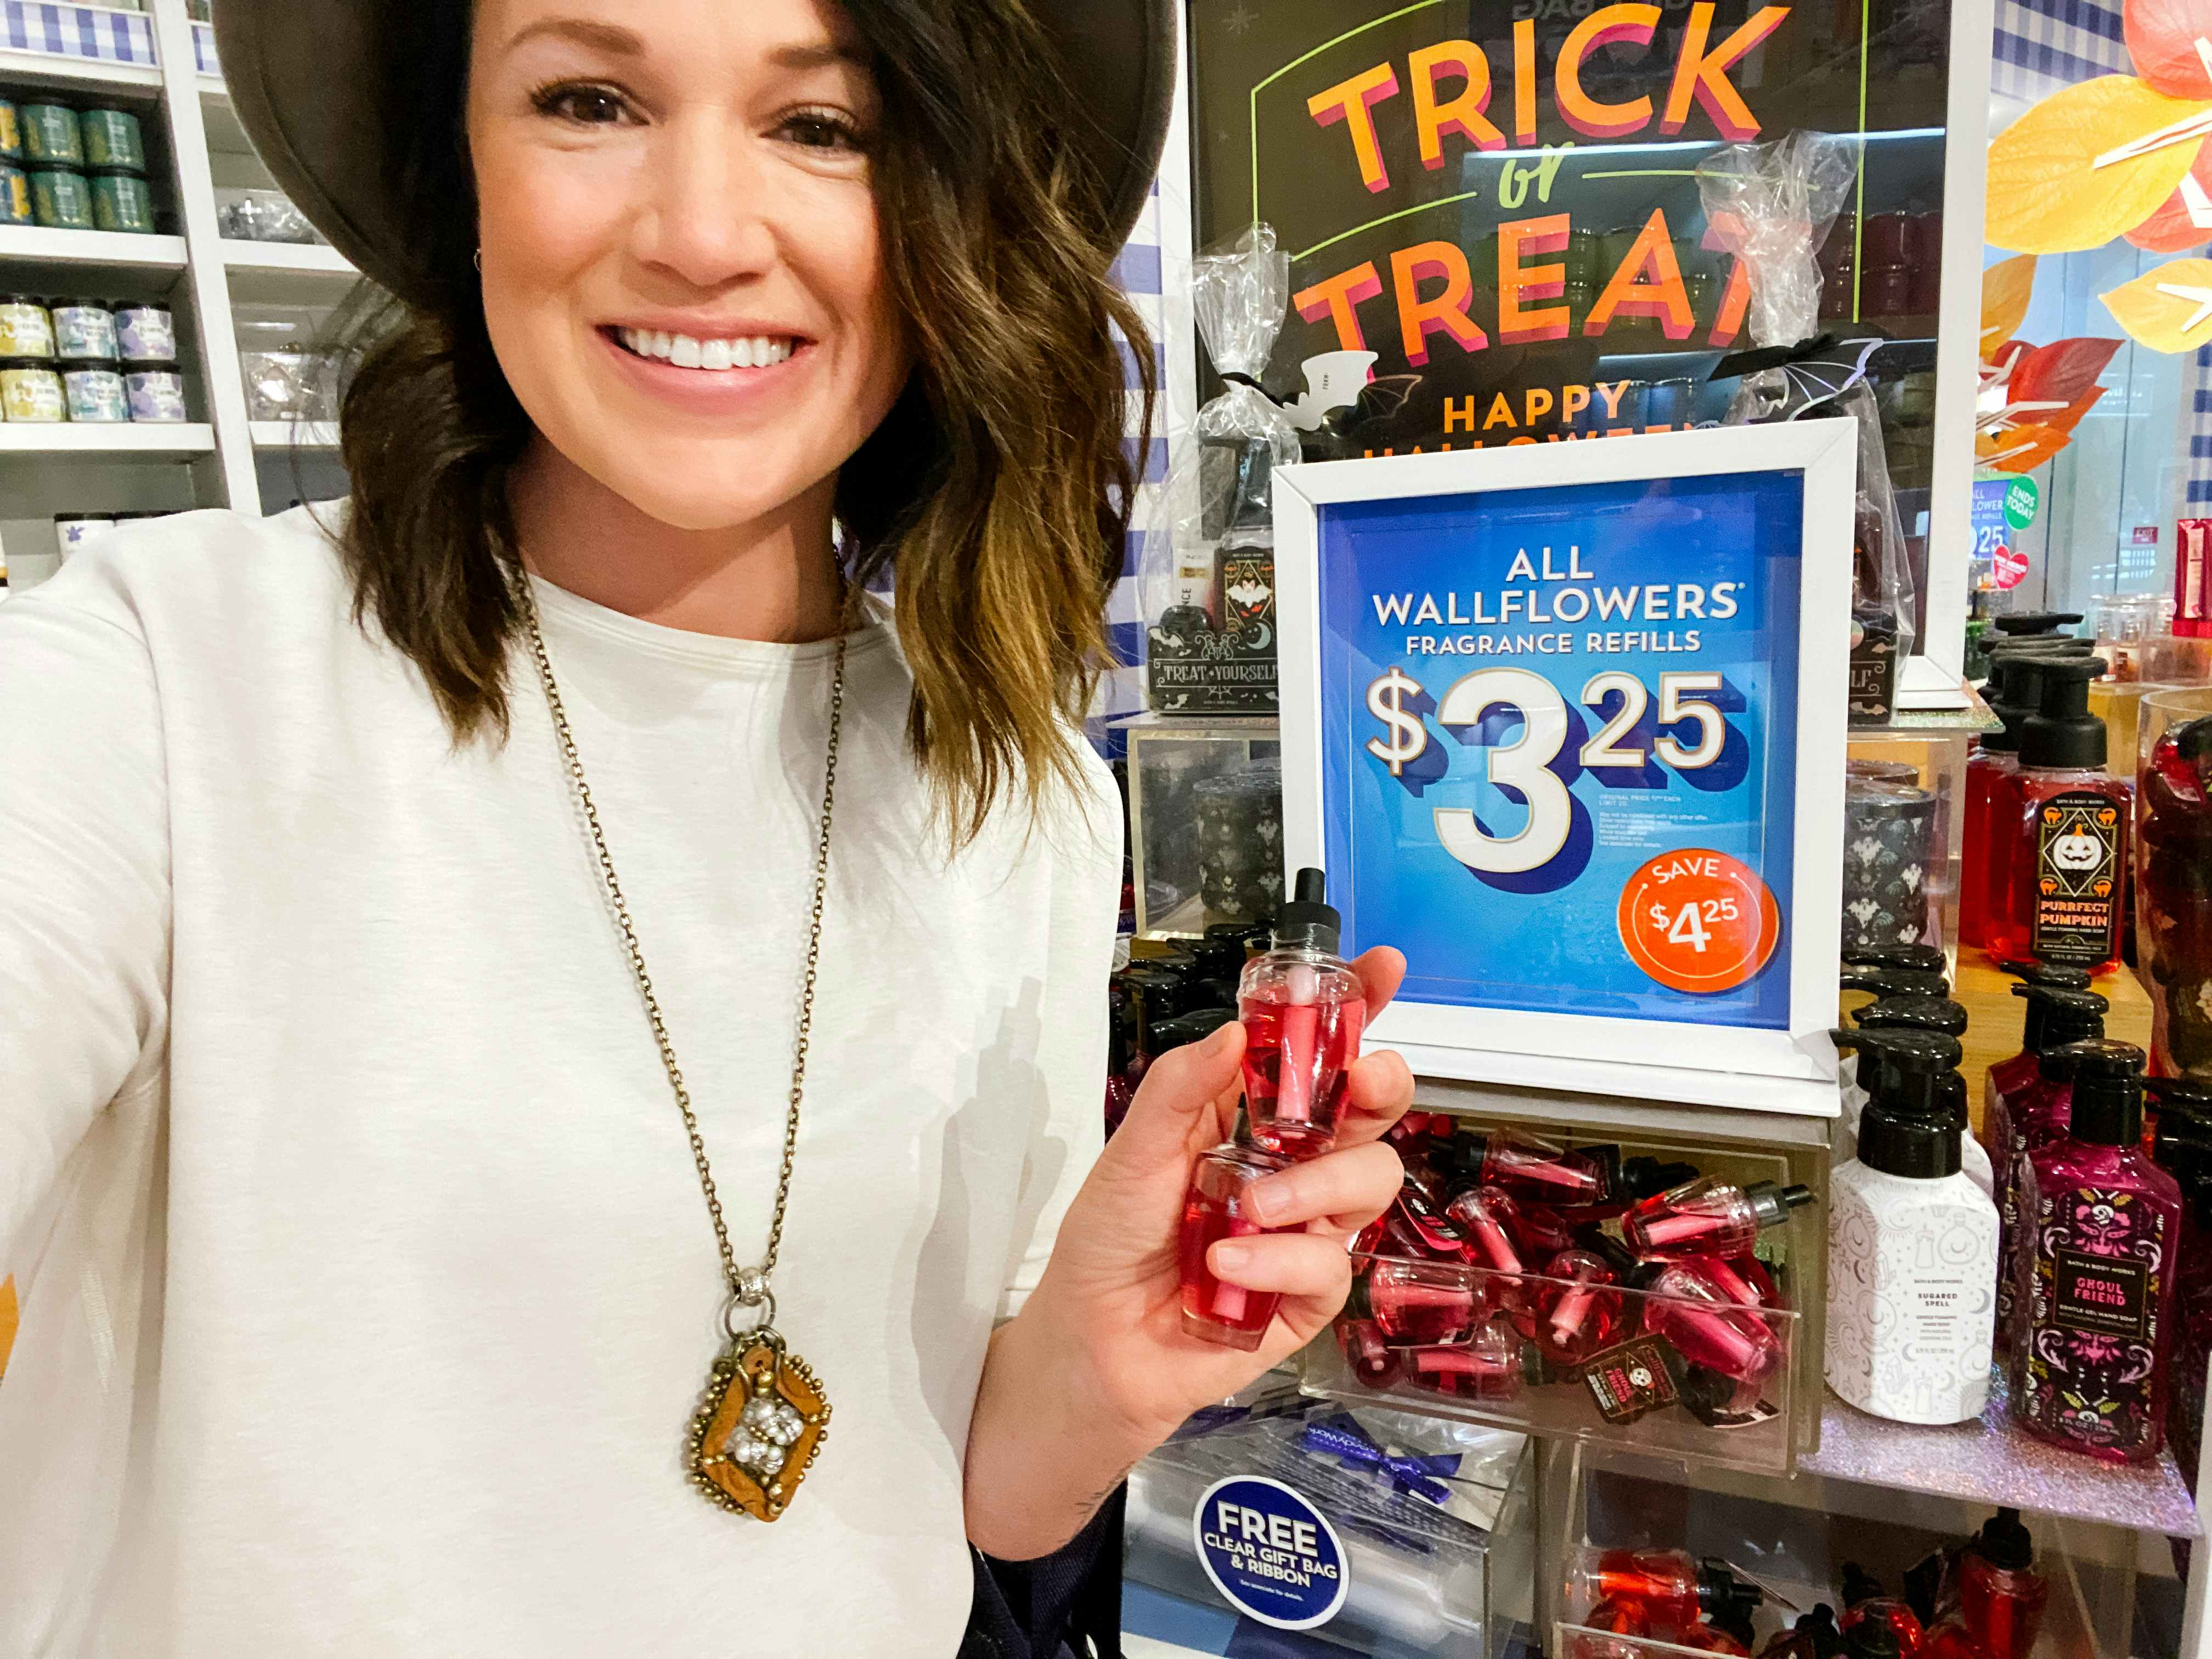 A woman smiling and holding up a Bath & Body Works wallflower refill in front of a sign that reads, "All wallflowers fragrance refills $3.25" inside Bath & Body Works.